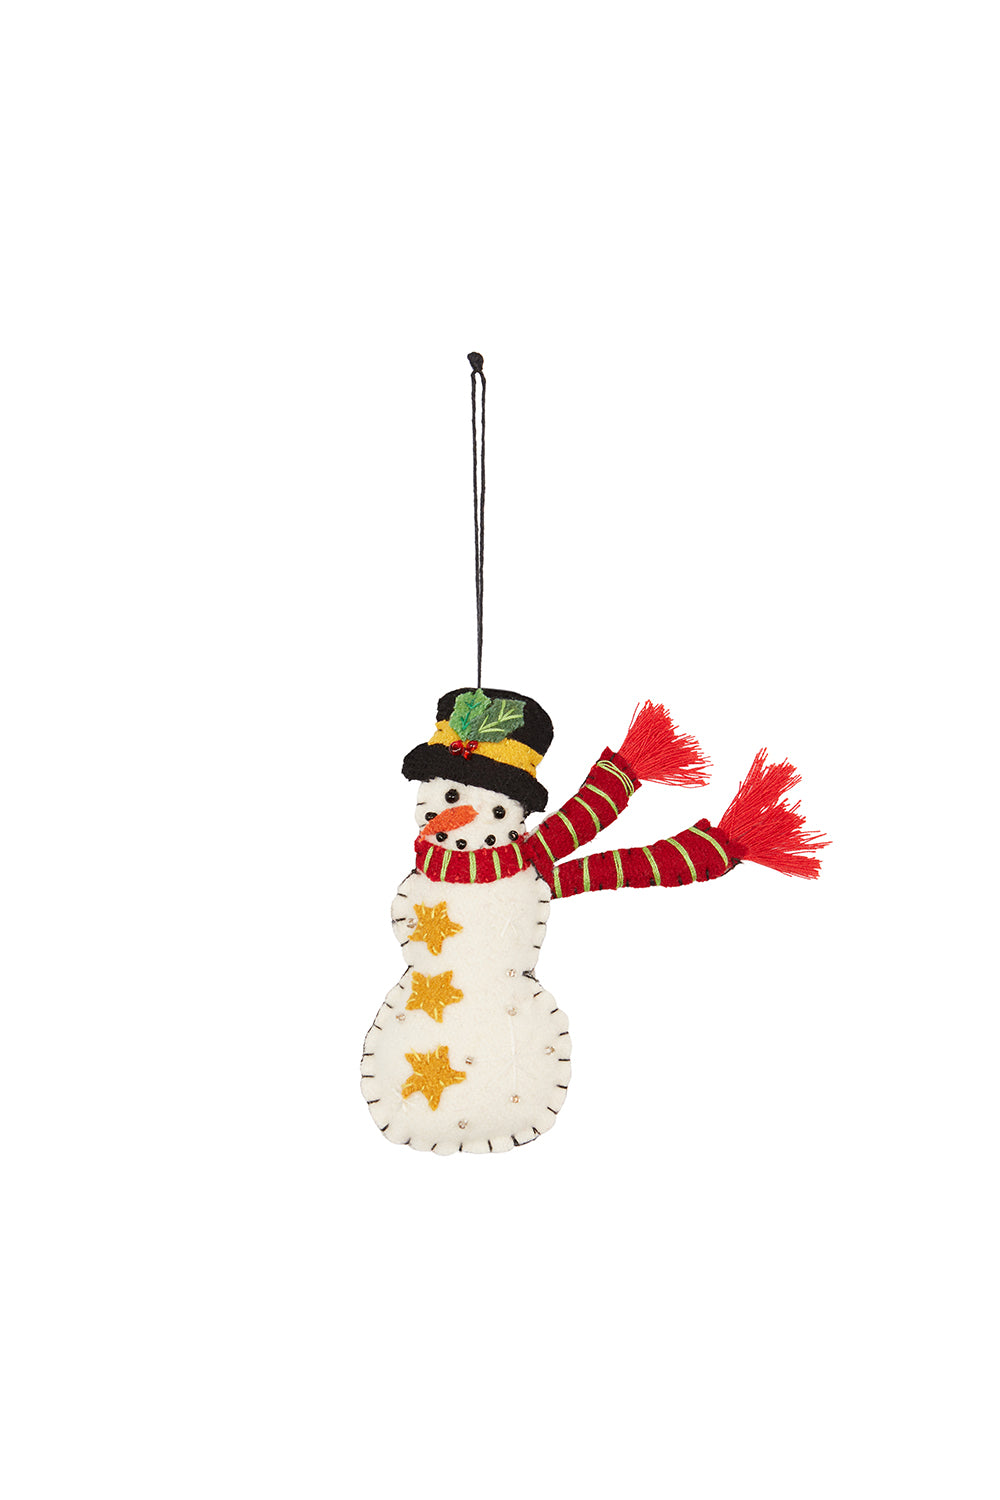 Decoration - Small Snowman Black Hat Red Scarf